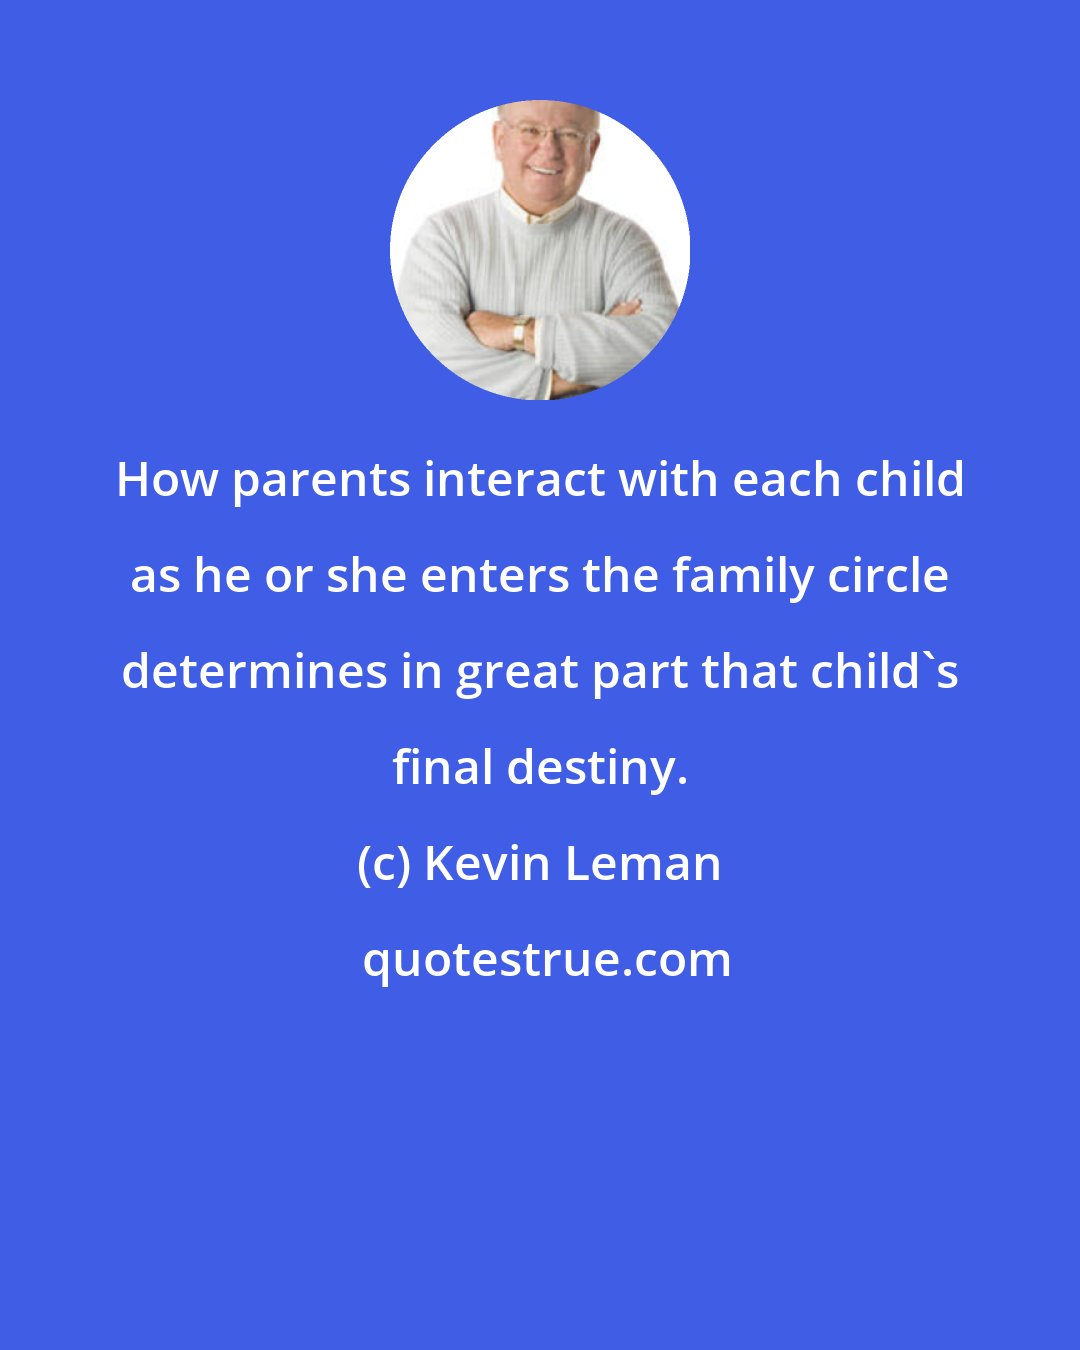 Kevin Leman: How parents interact with each child as he or she enters the family circle determines in great part that child's final destiny.